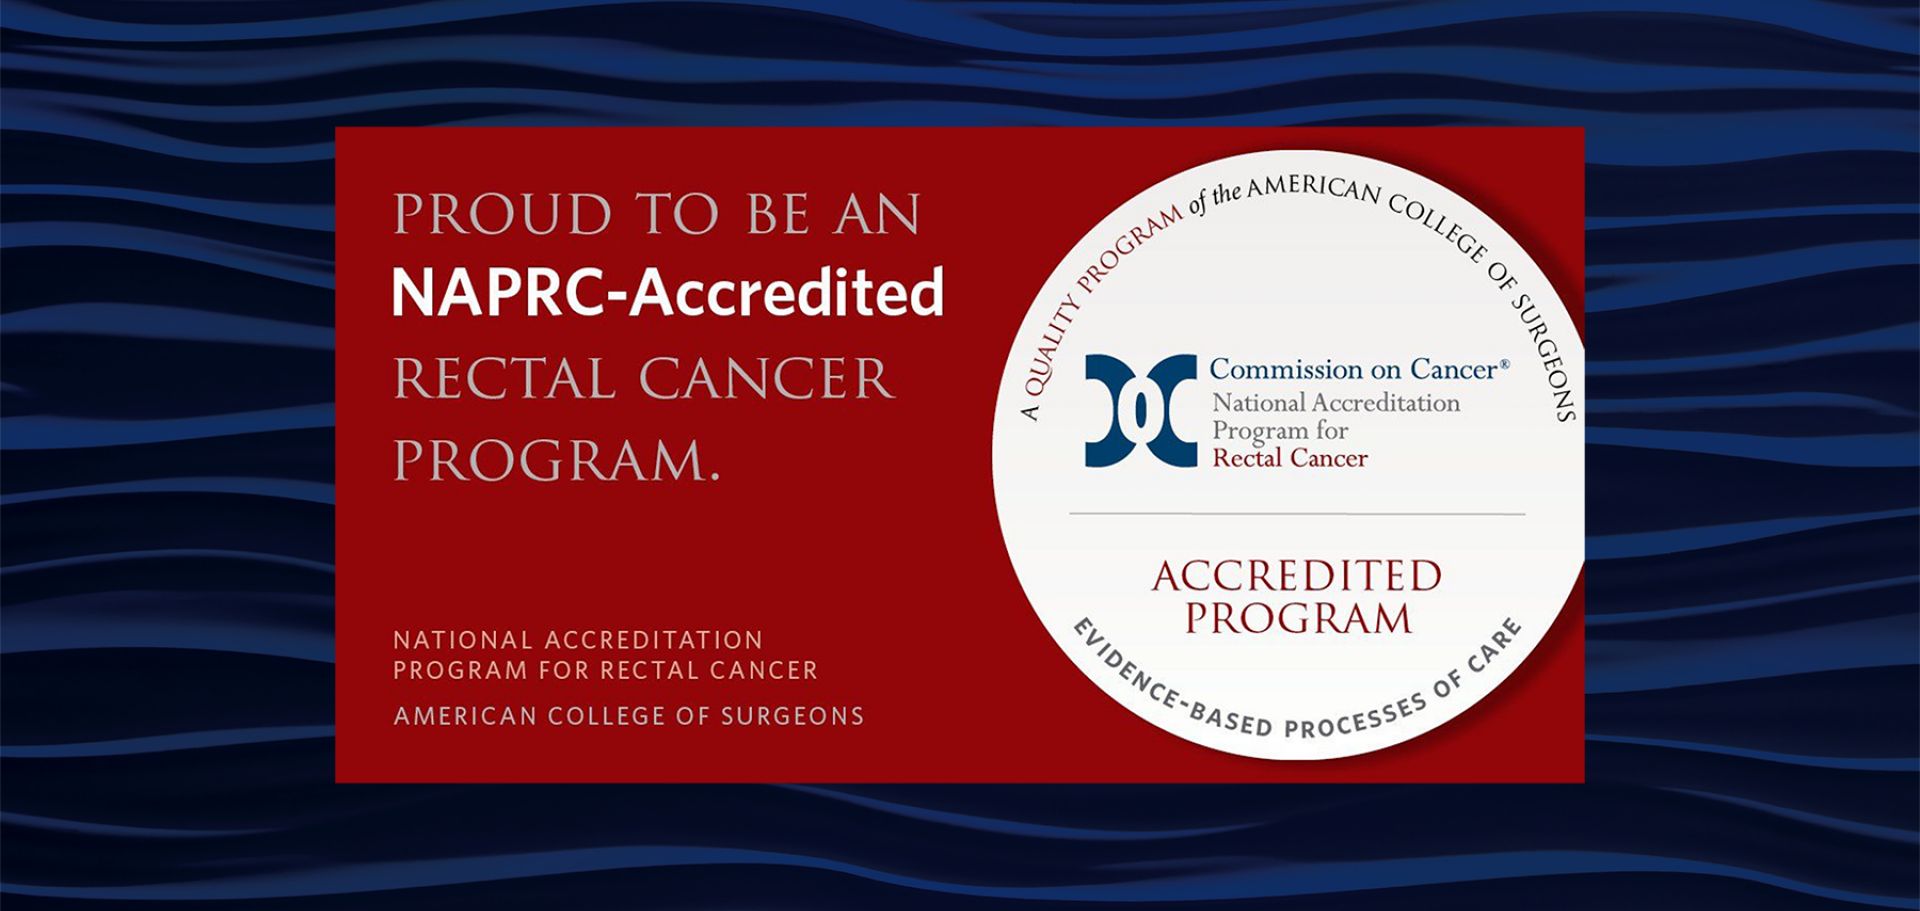 USA Health earns accreditation from the National Accreditation Program for Rectal Cancer